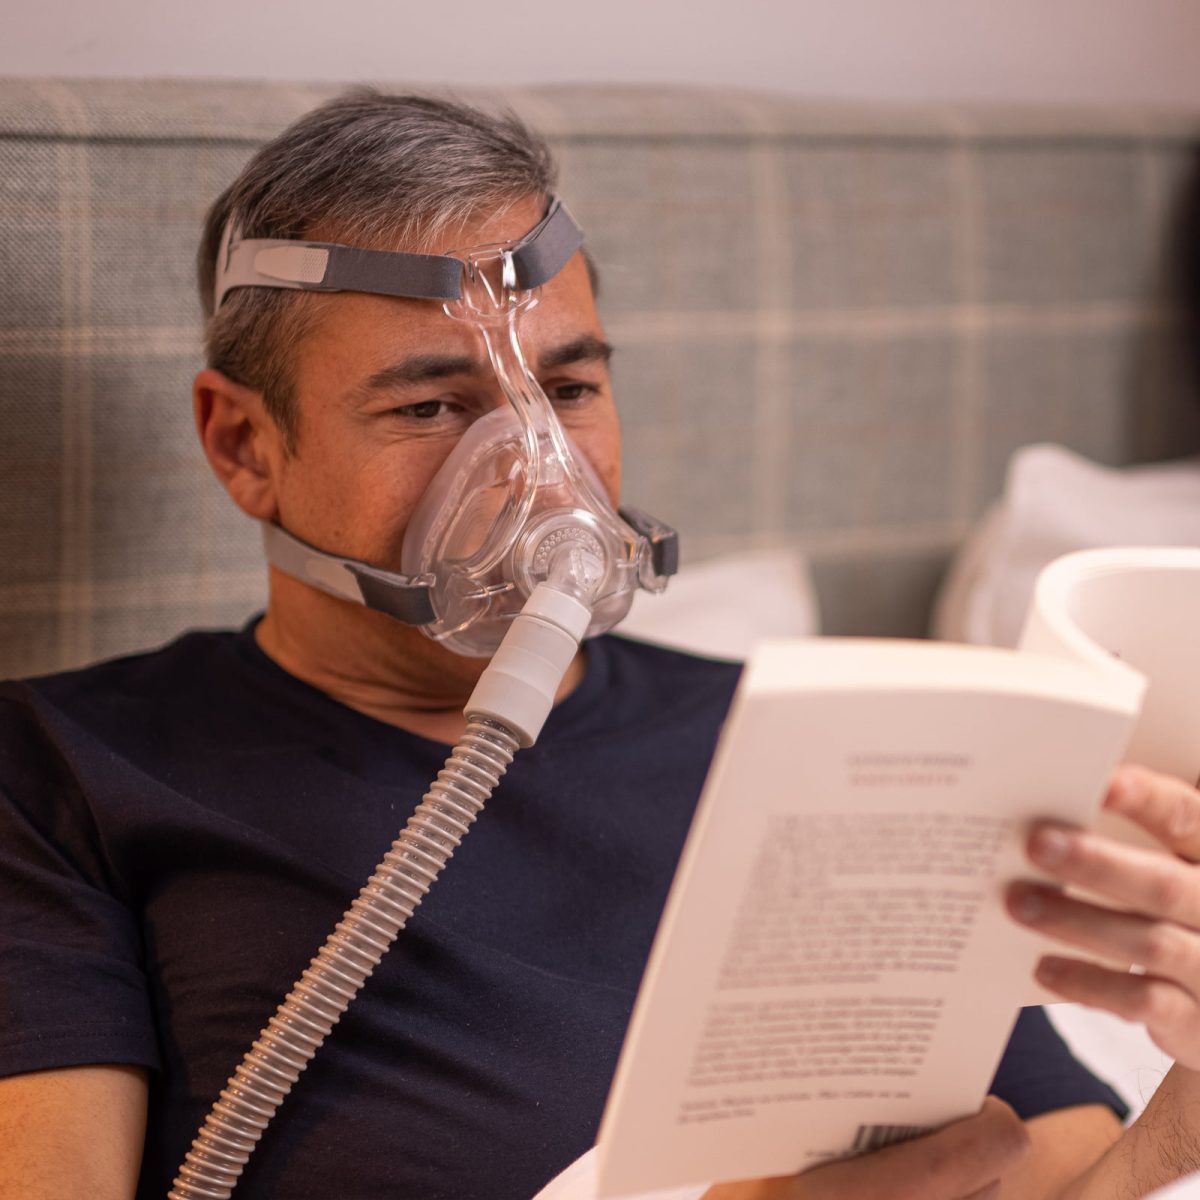 Man reading in bed using CPAP devices